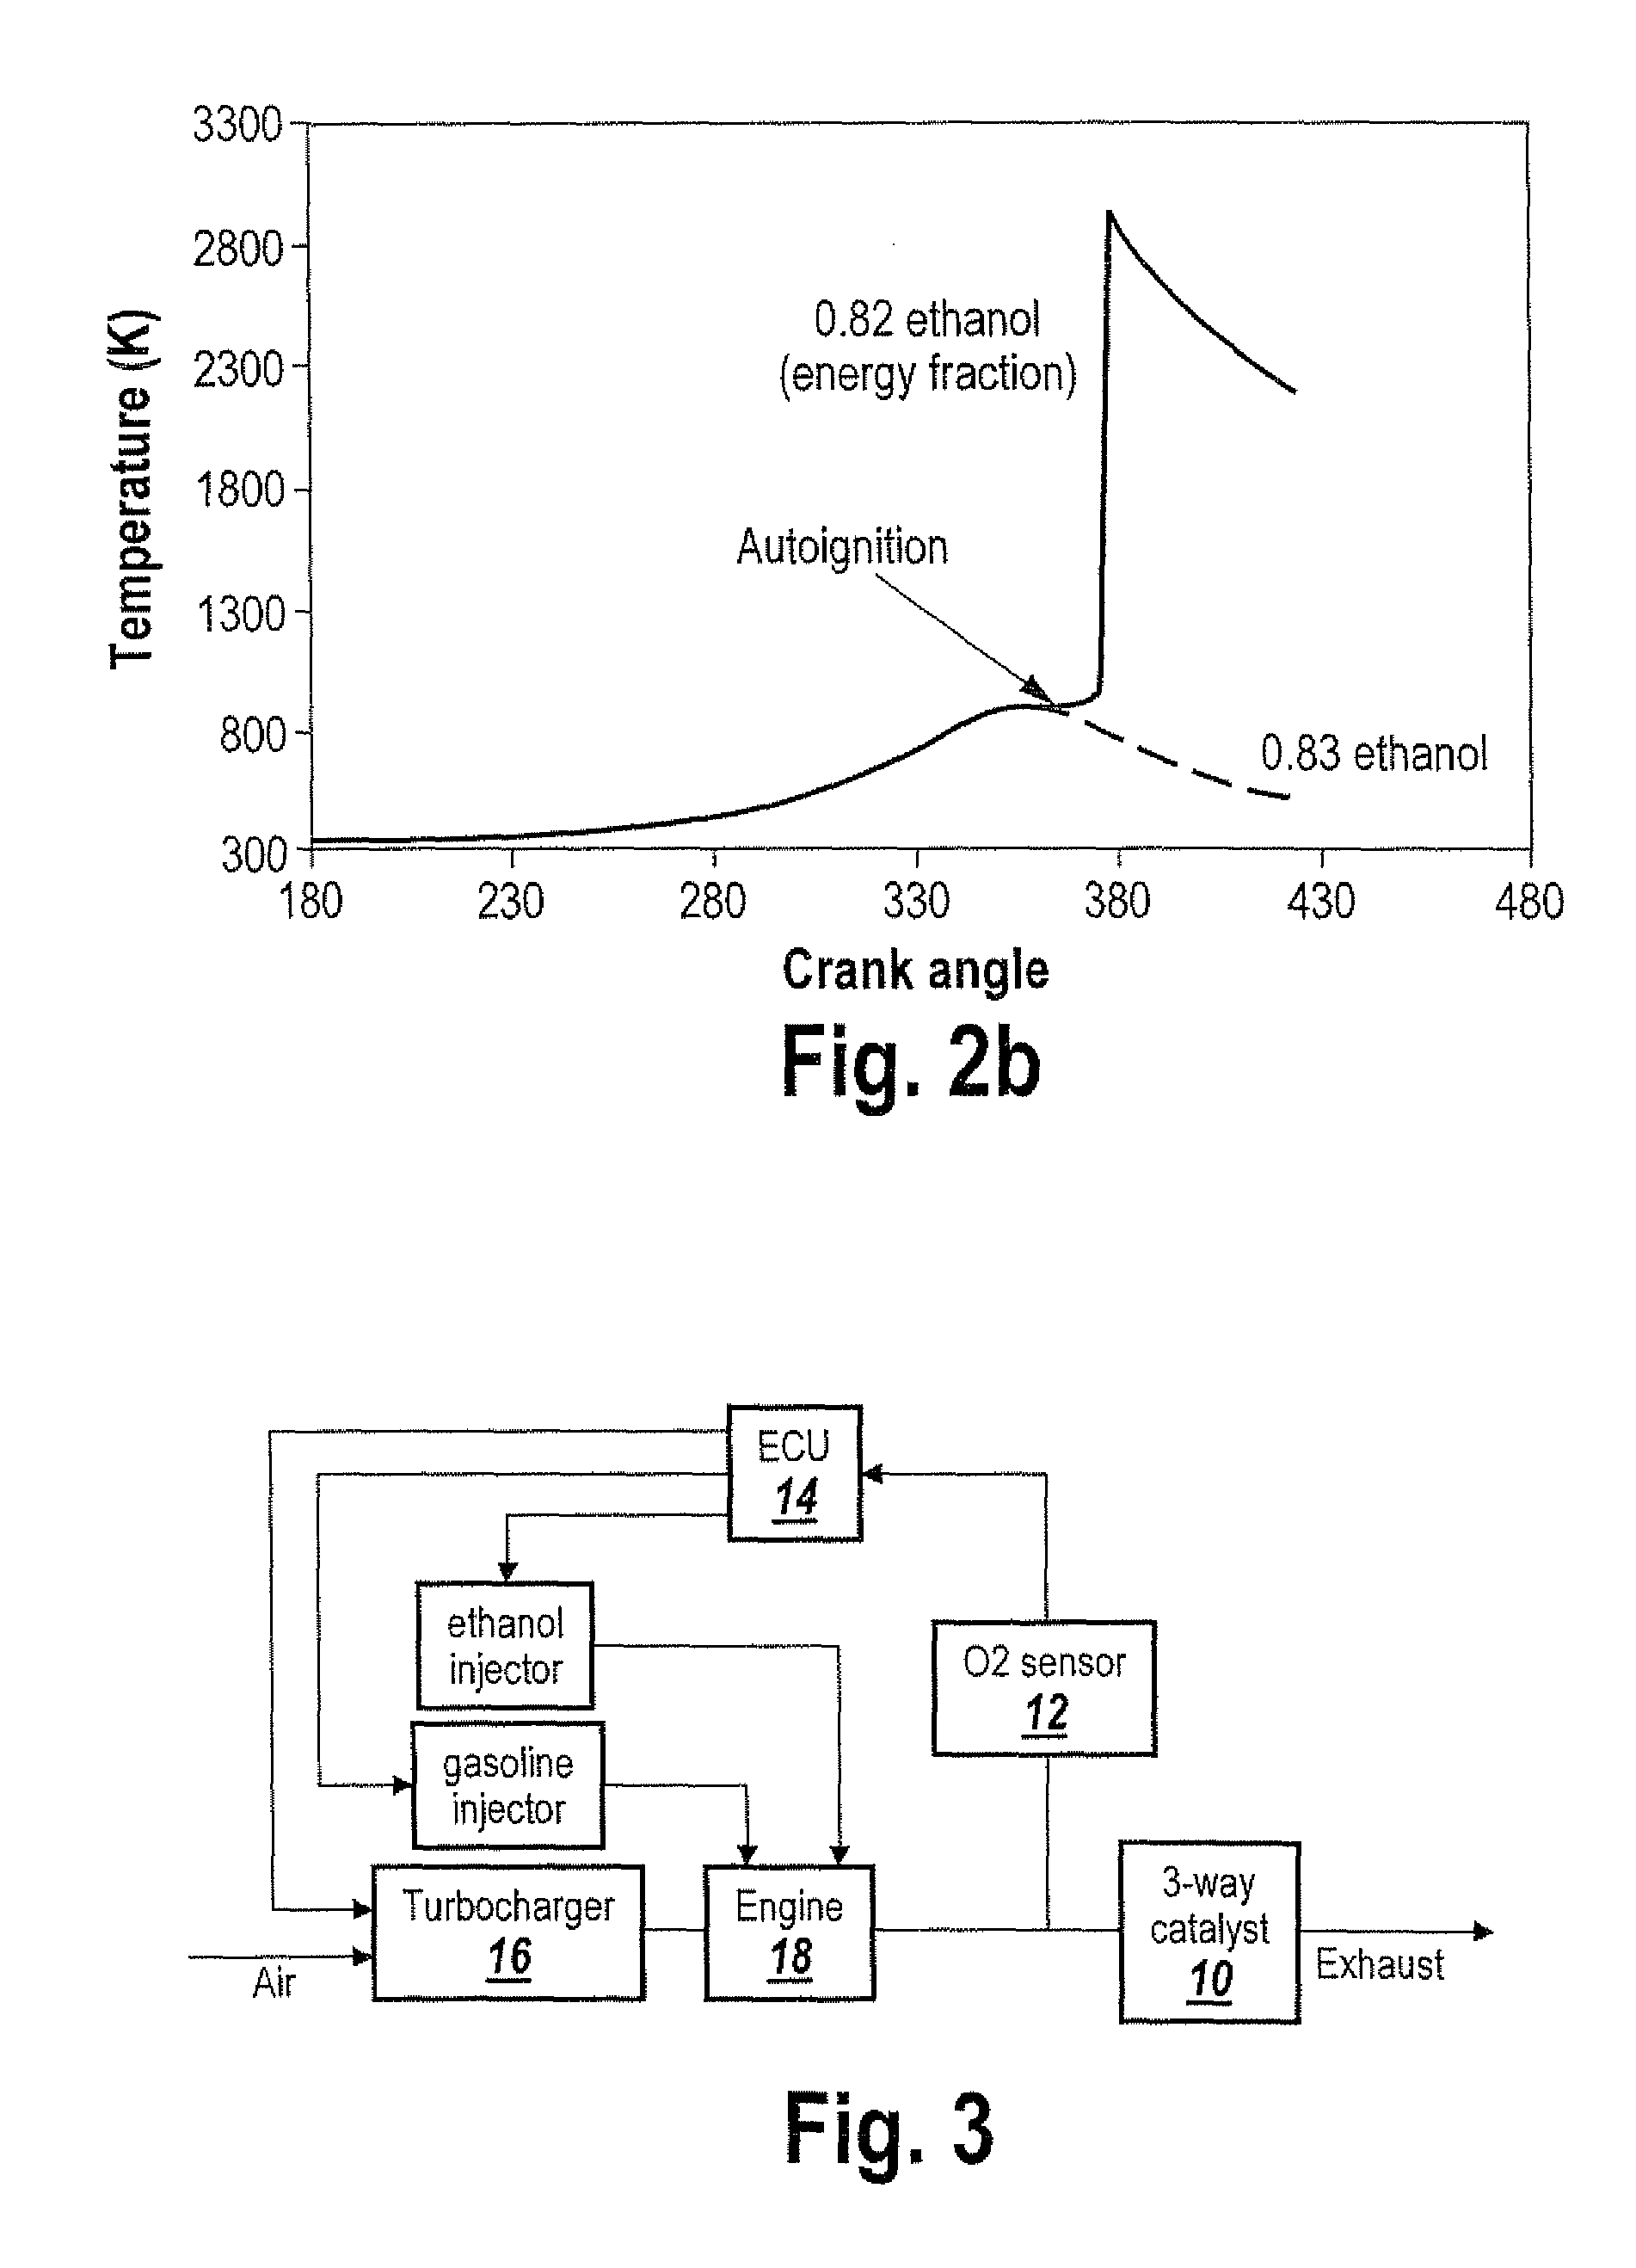 Optimized fuel management system for direct injection ethanol enhancement of gasoline engines